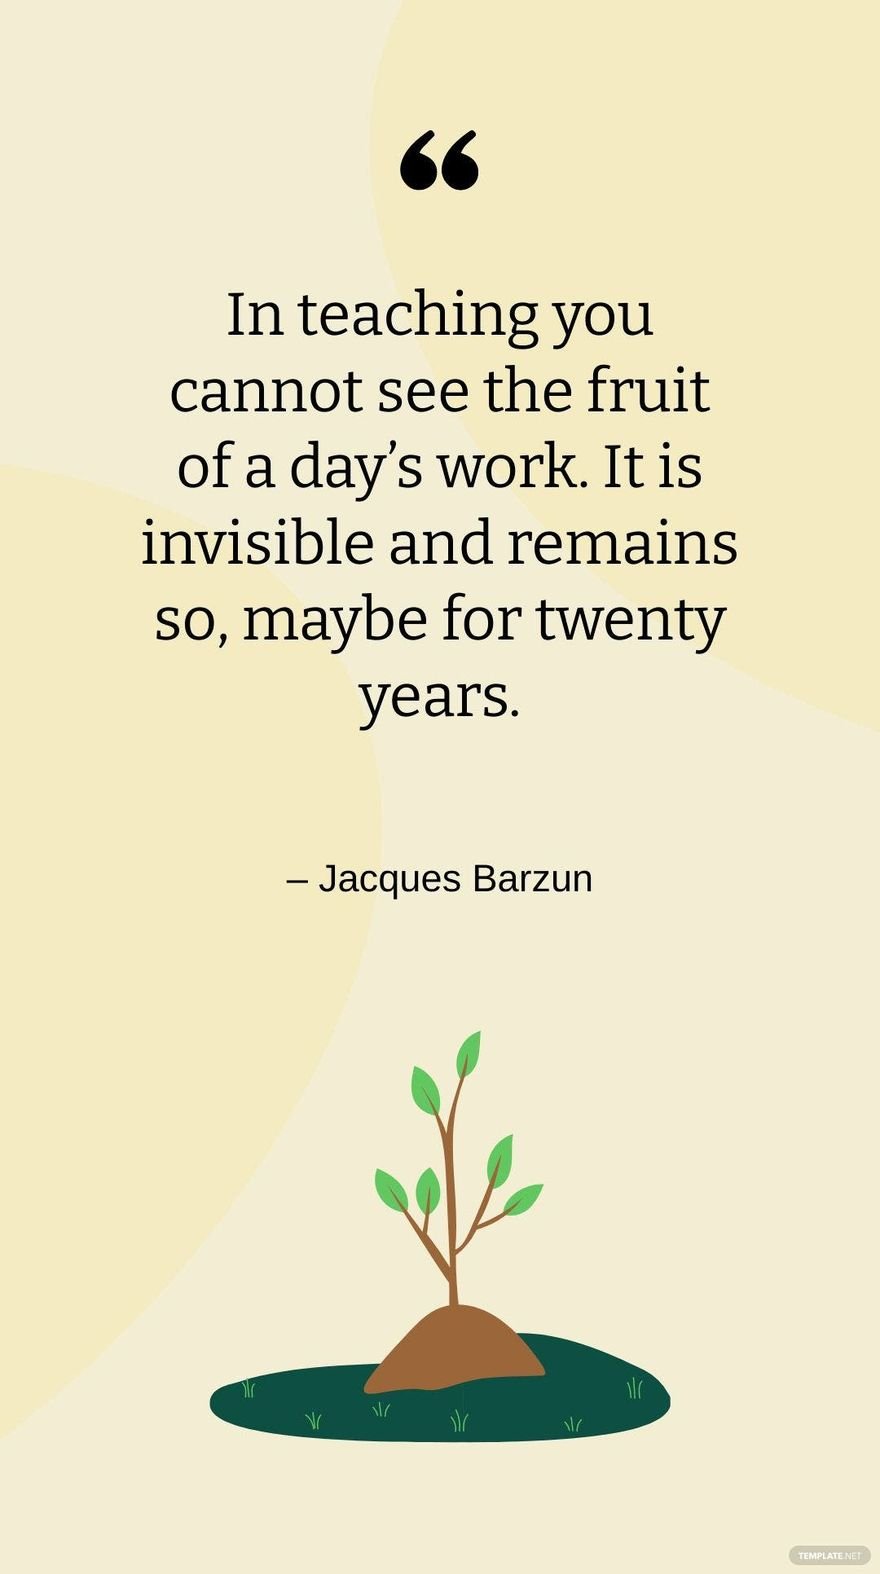 Free Jacques Barzun - In teaching you cannot see the fruit of a day’s work. It is invisible and remains so, maybe for twenty years. in JPG